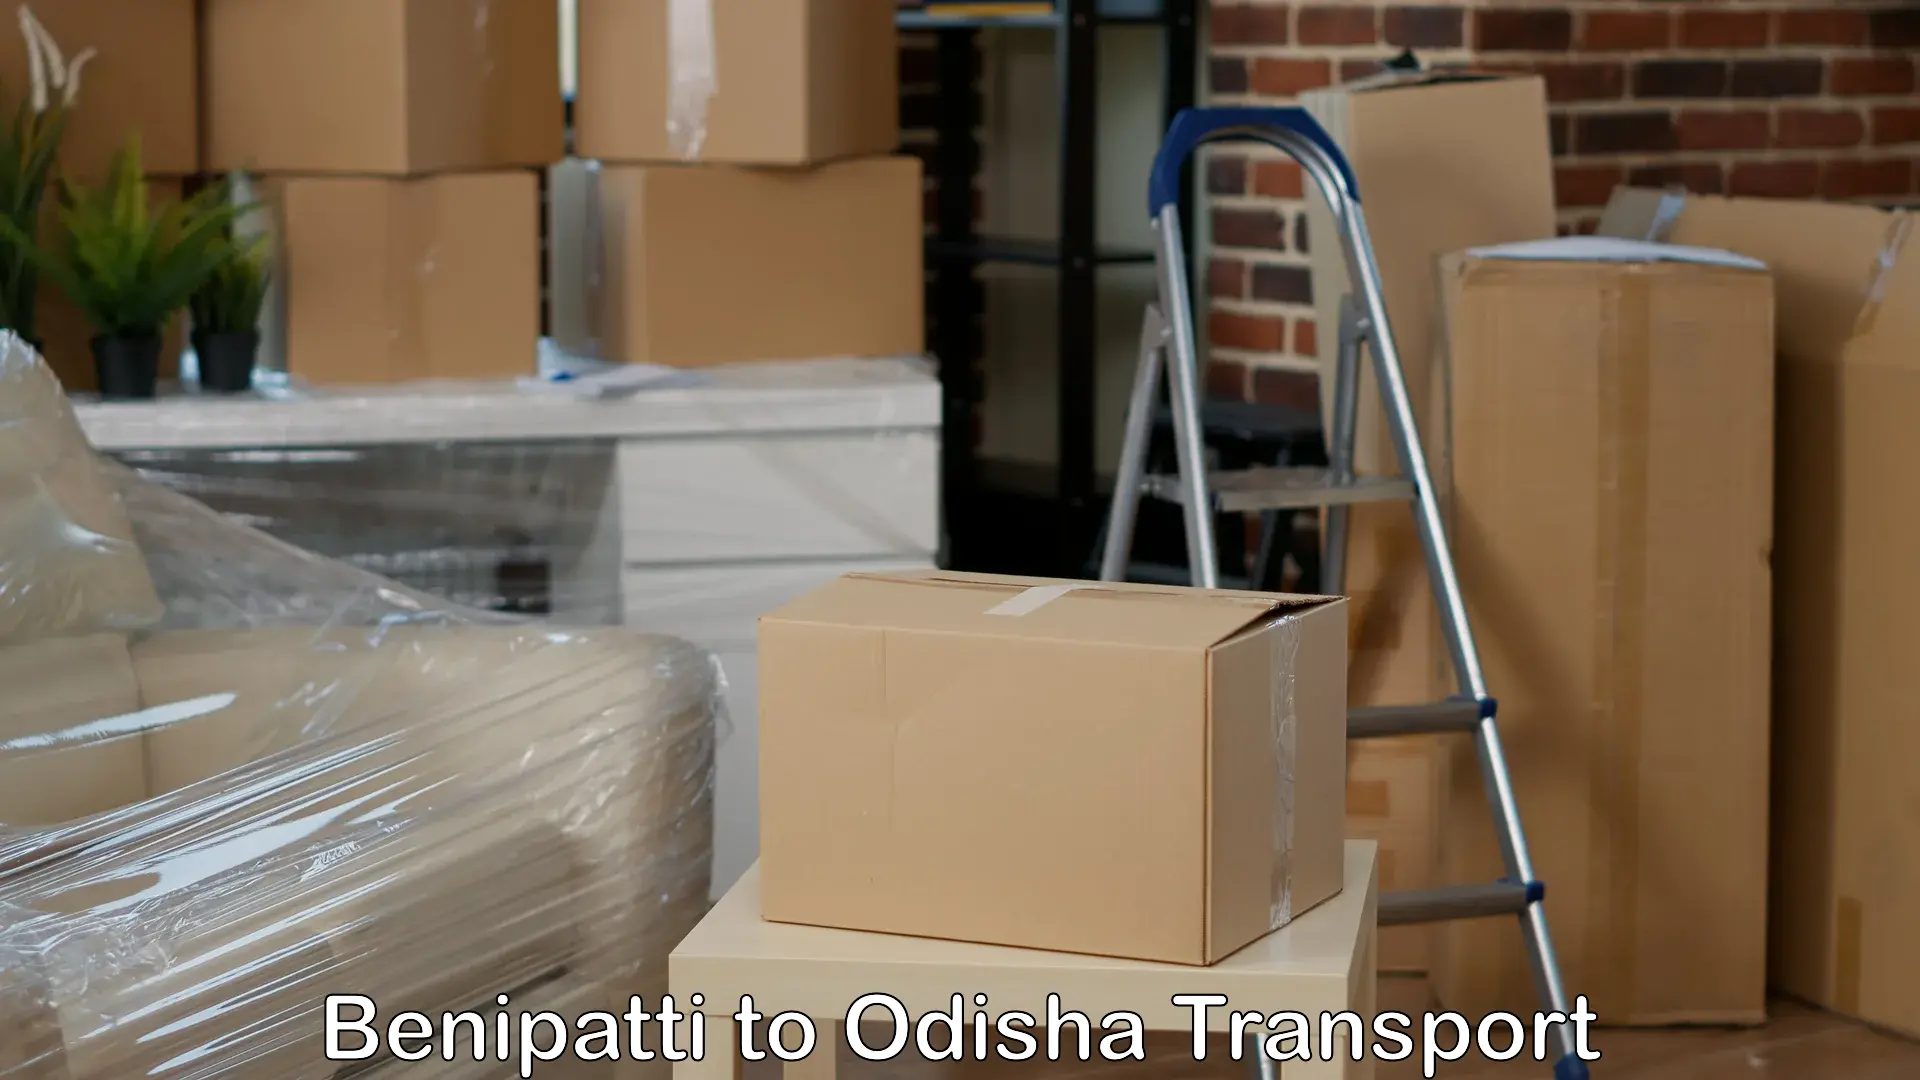 Truck transport companies in India Benipatti to Anandapur